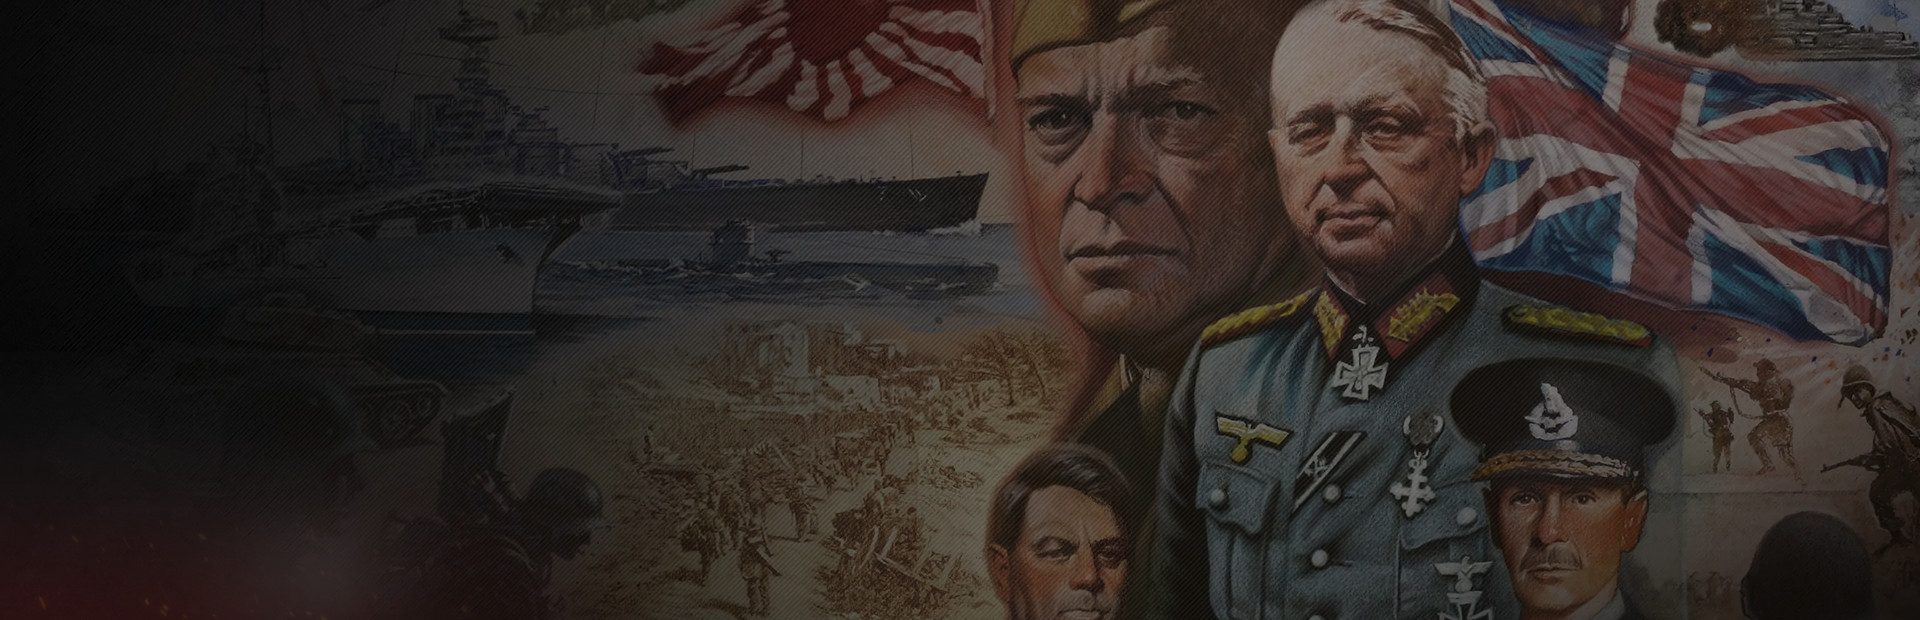 Axis & Allies 1942 Online cover image